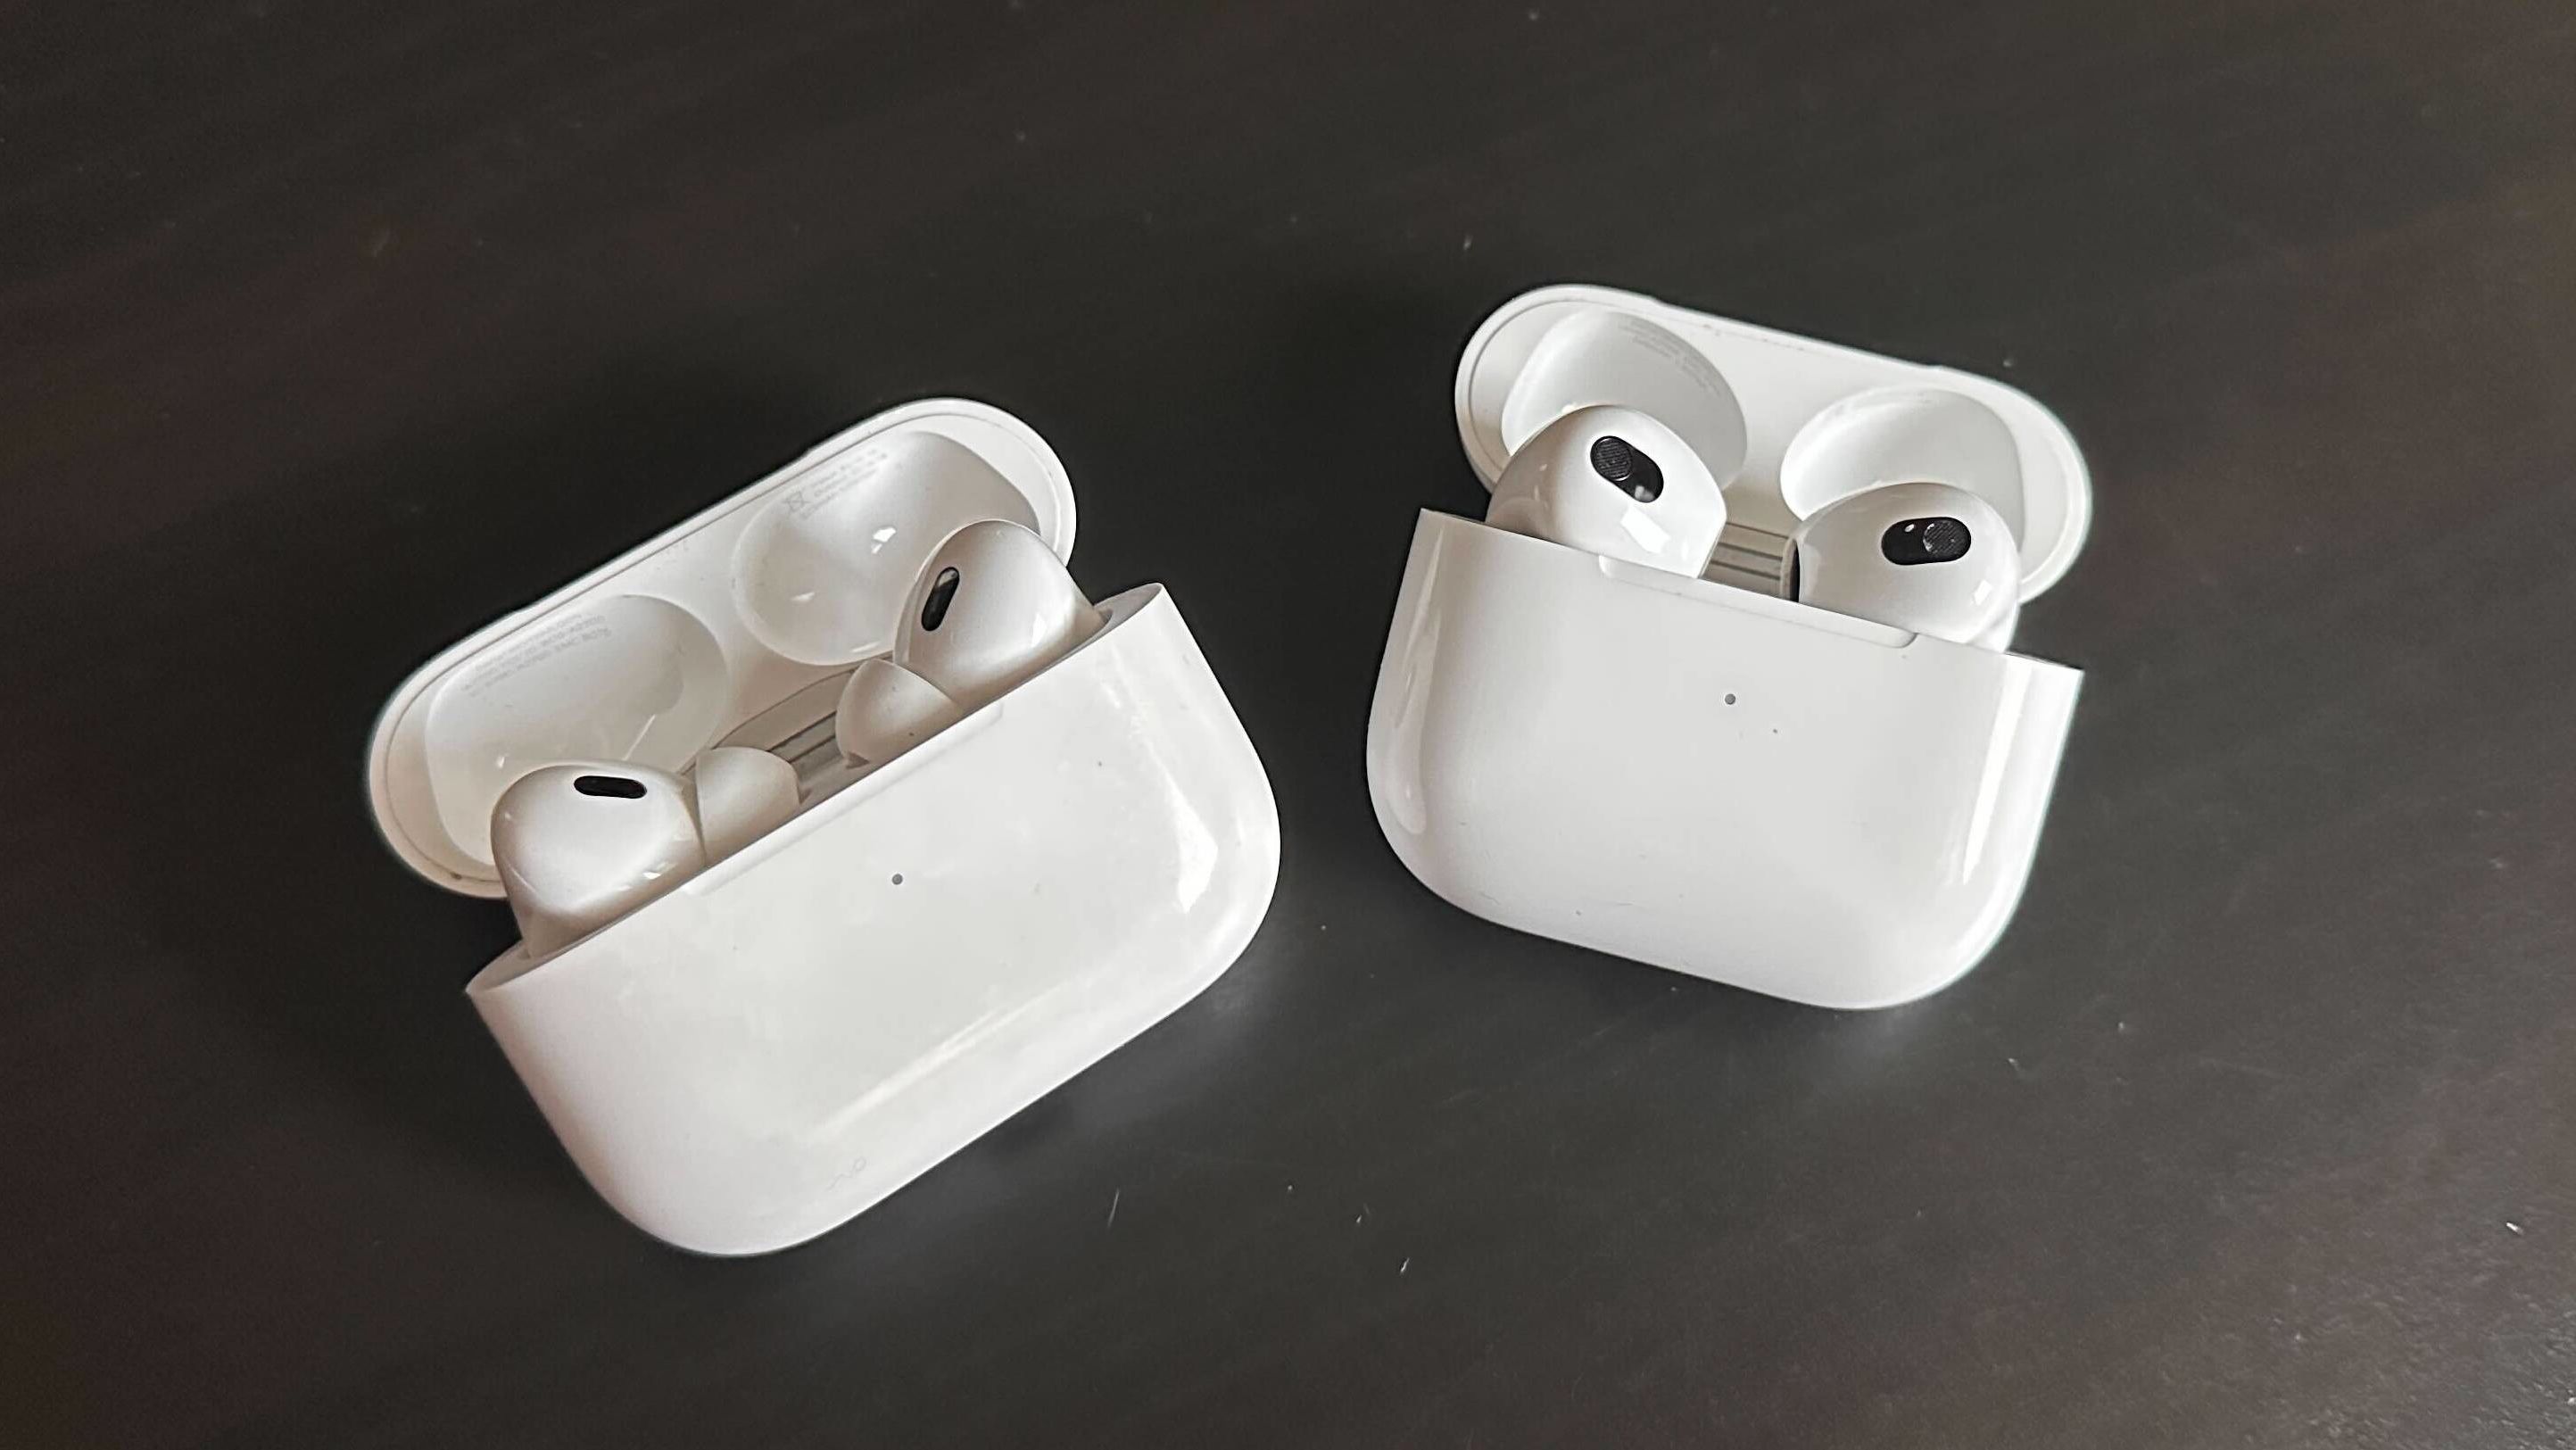 AirPods Pro 2 Vs AirPods Pro 1 In 2023! (Comparison) (Review) 